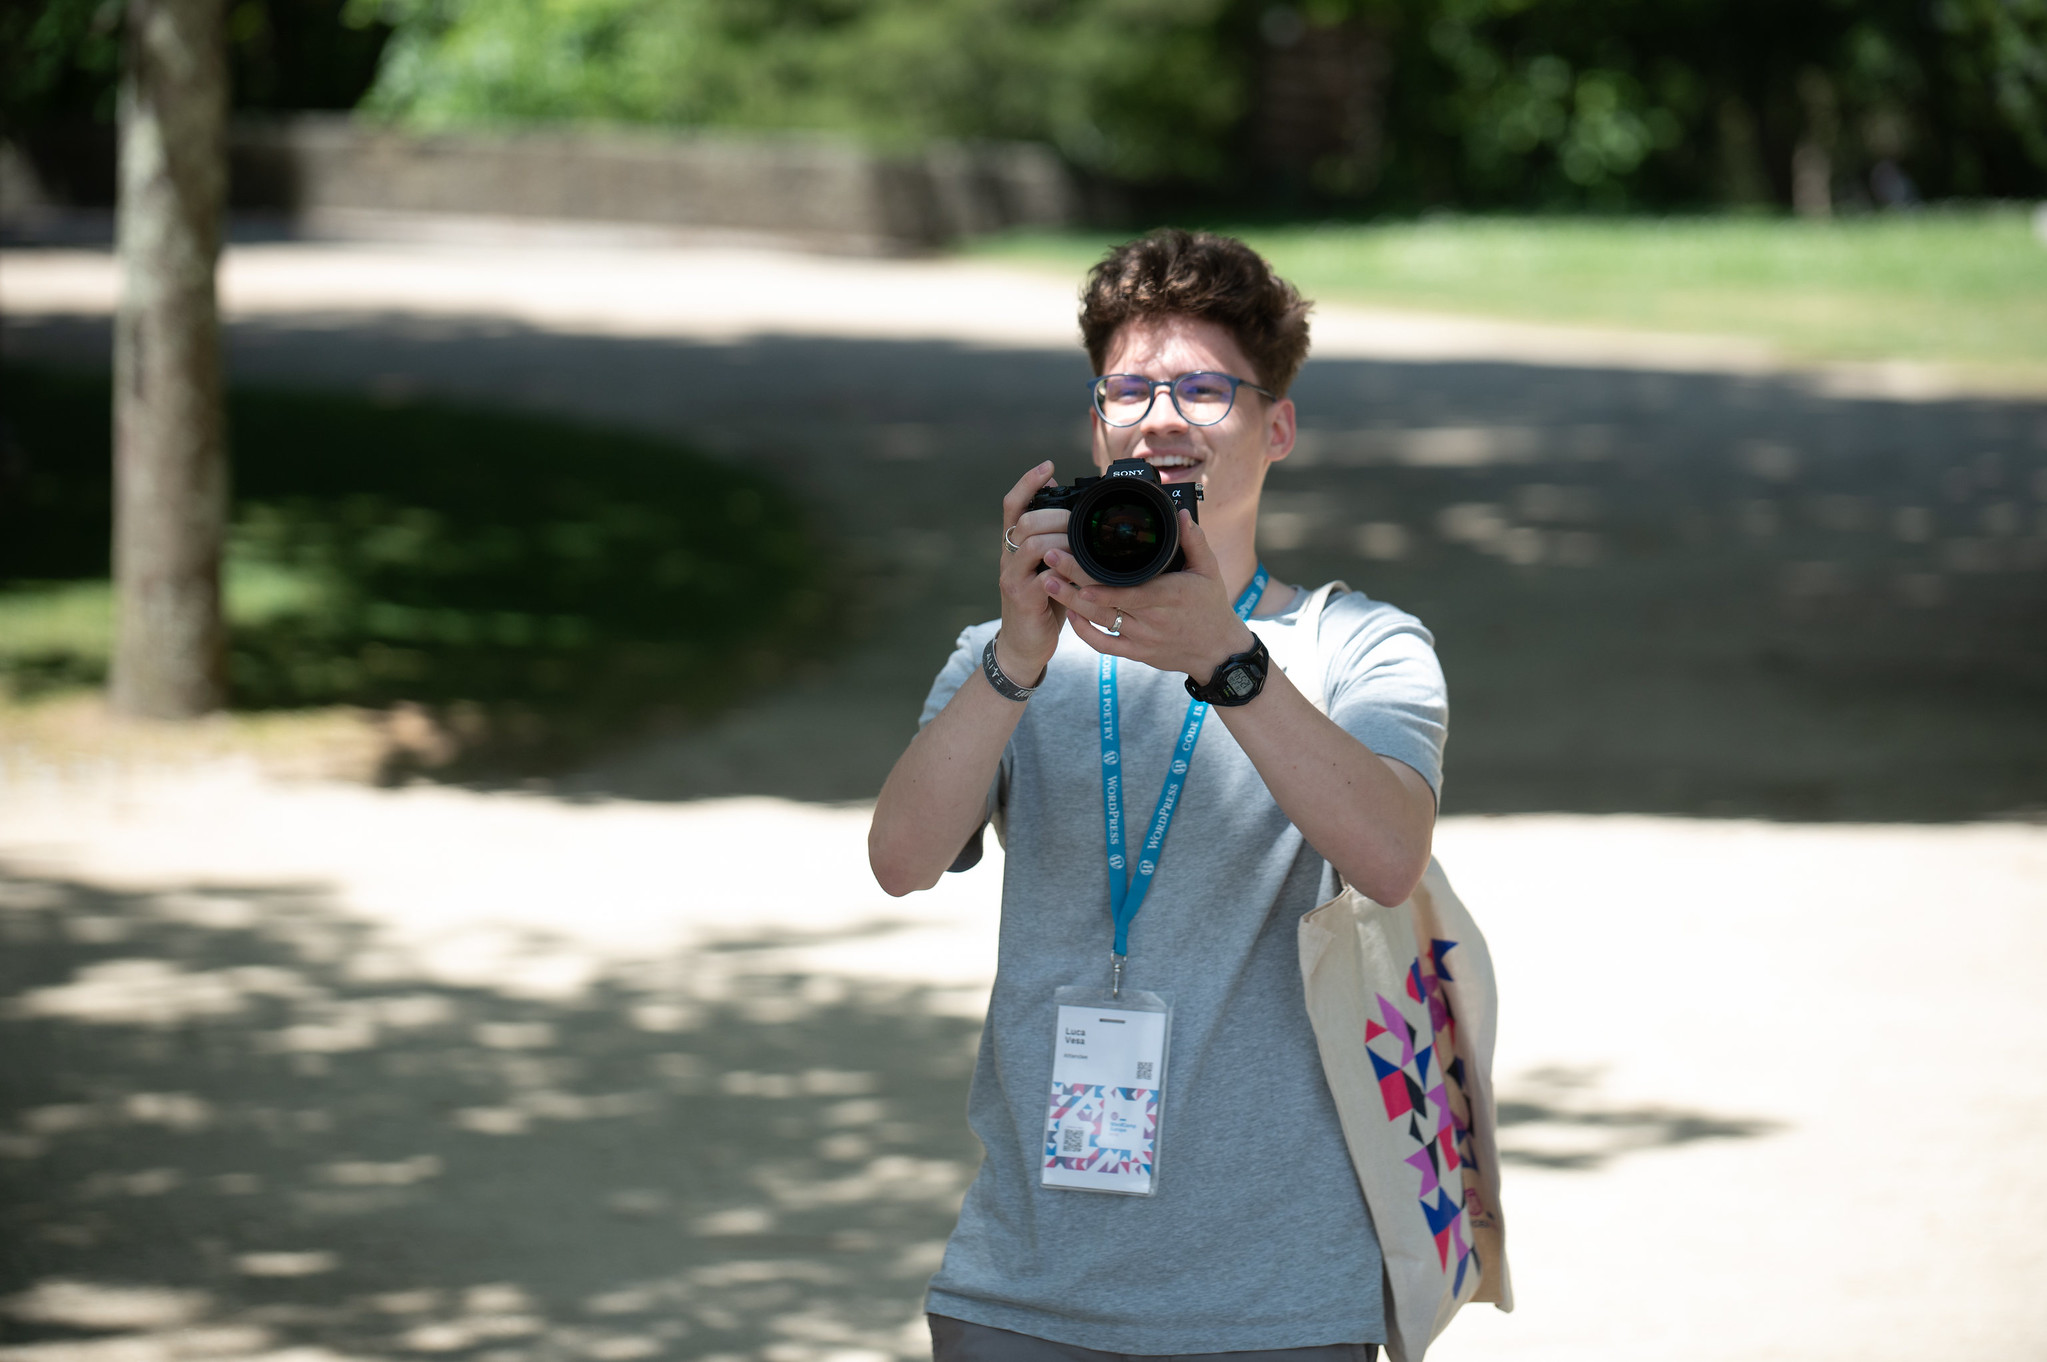 Are You an Amateur or Professional Photographer? Join the WordCamp Lisboa Organizing Team!